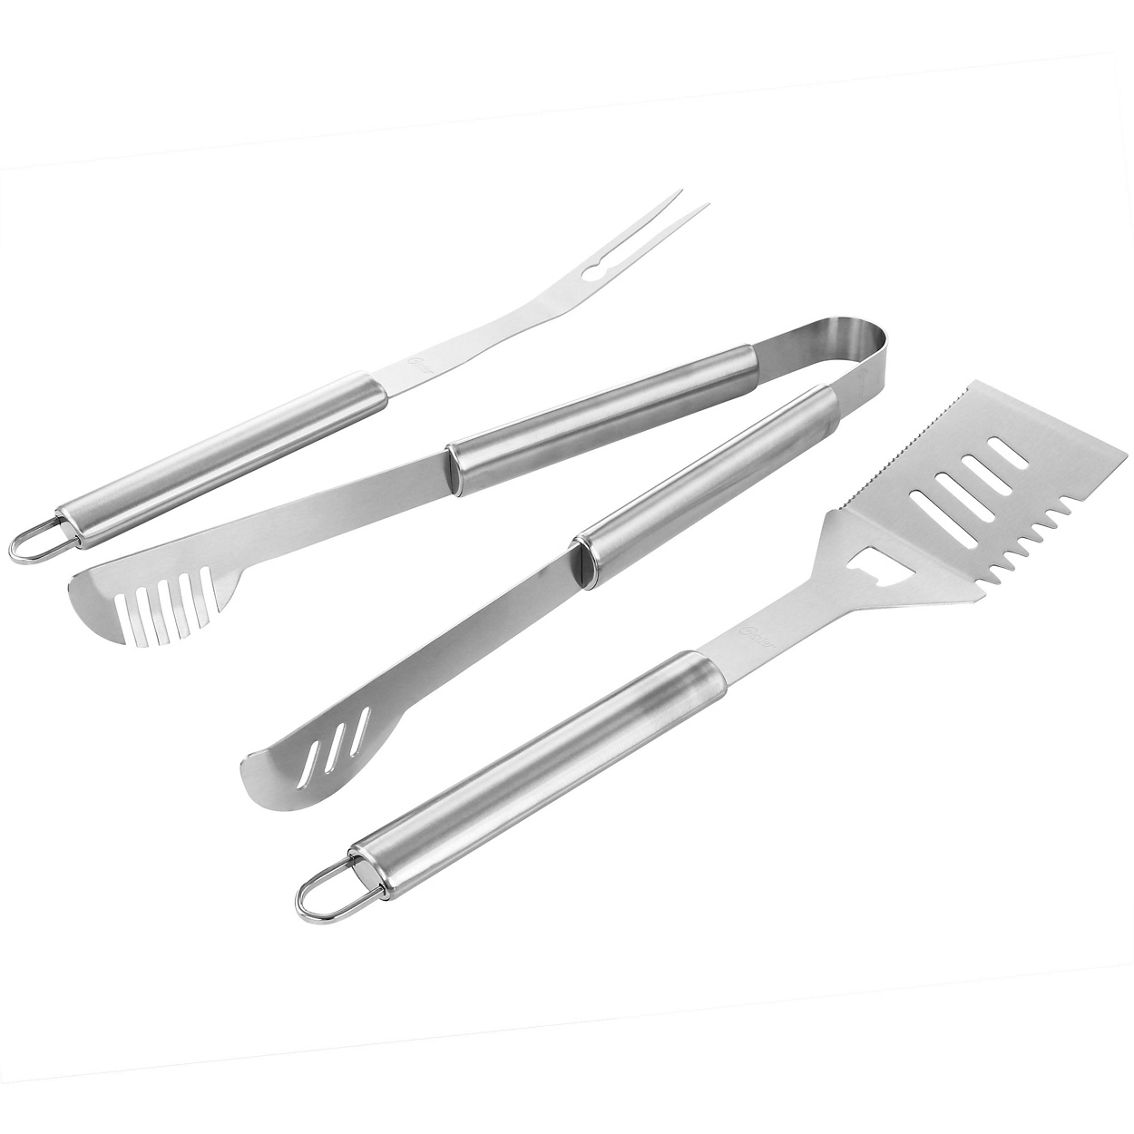 Oster Baldwin 3 Piece Stainless Steel Barbecue Tool Set in Silver - Image 2 of 5